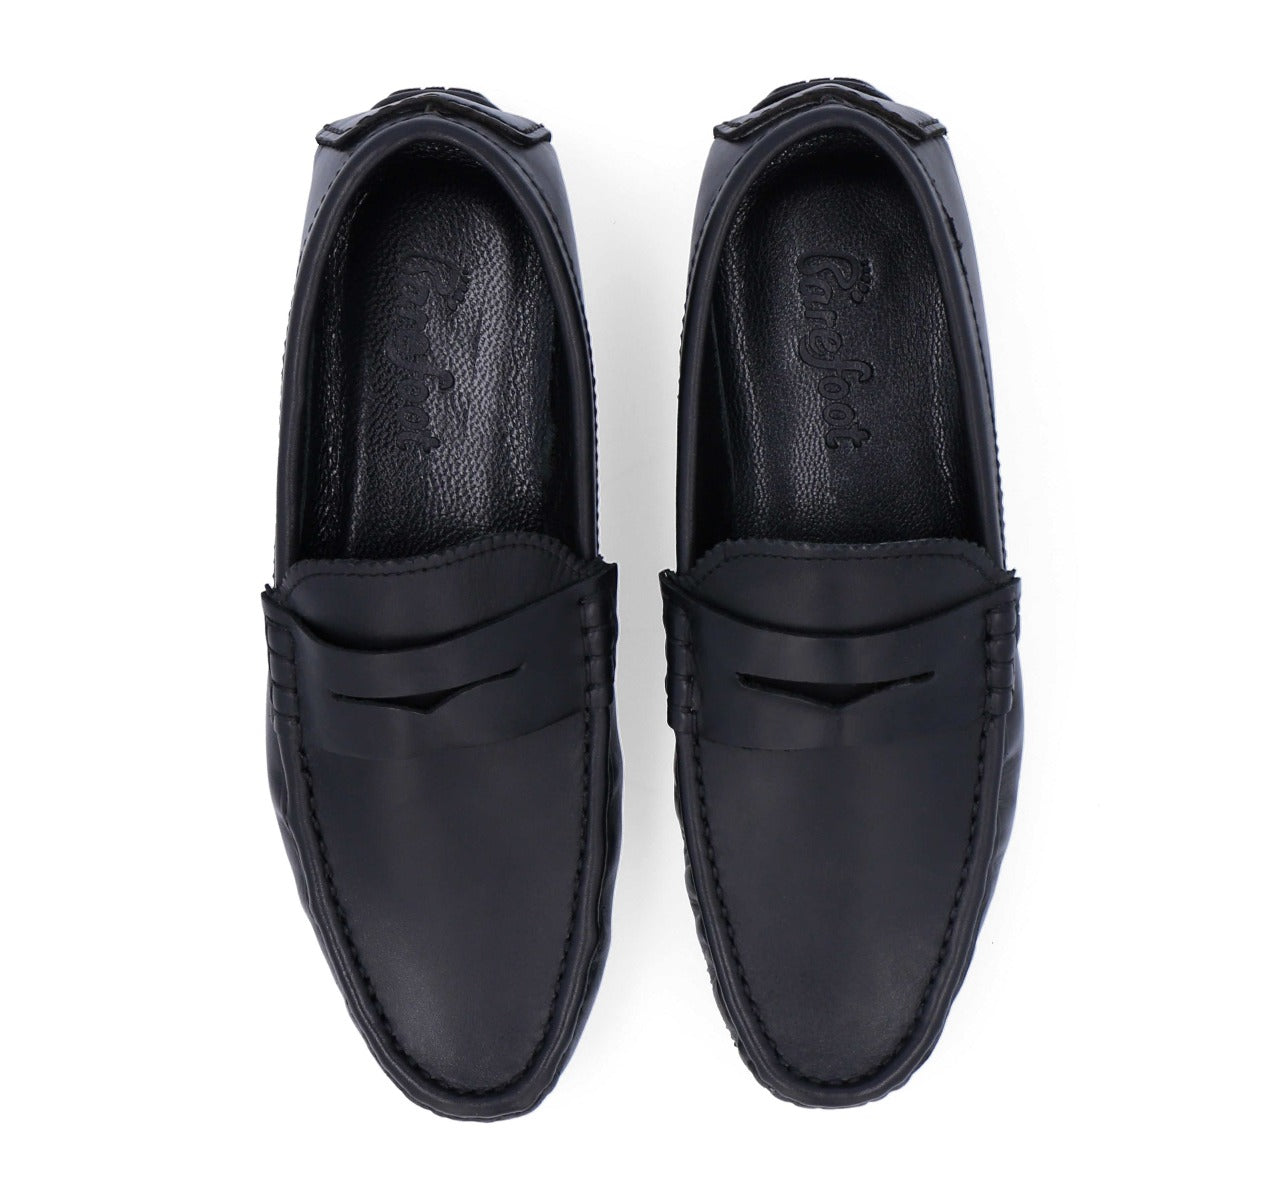 Barefoot Black Loafers Lace Up Suede For Men 2080